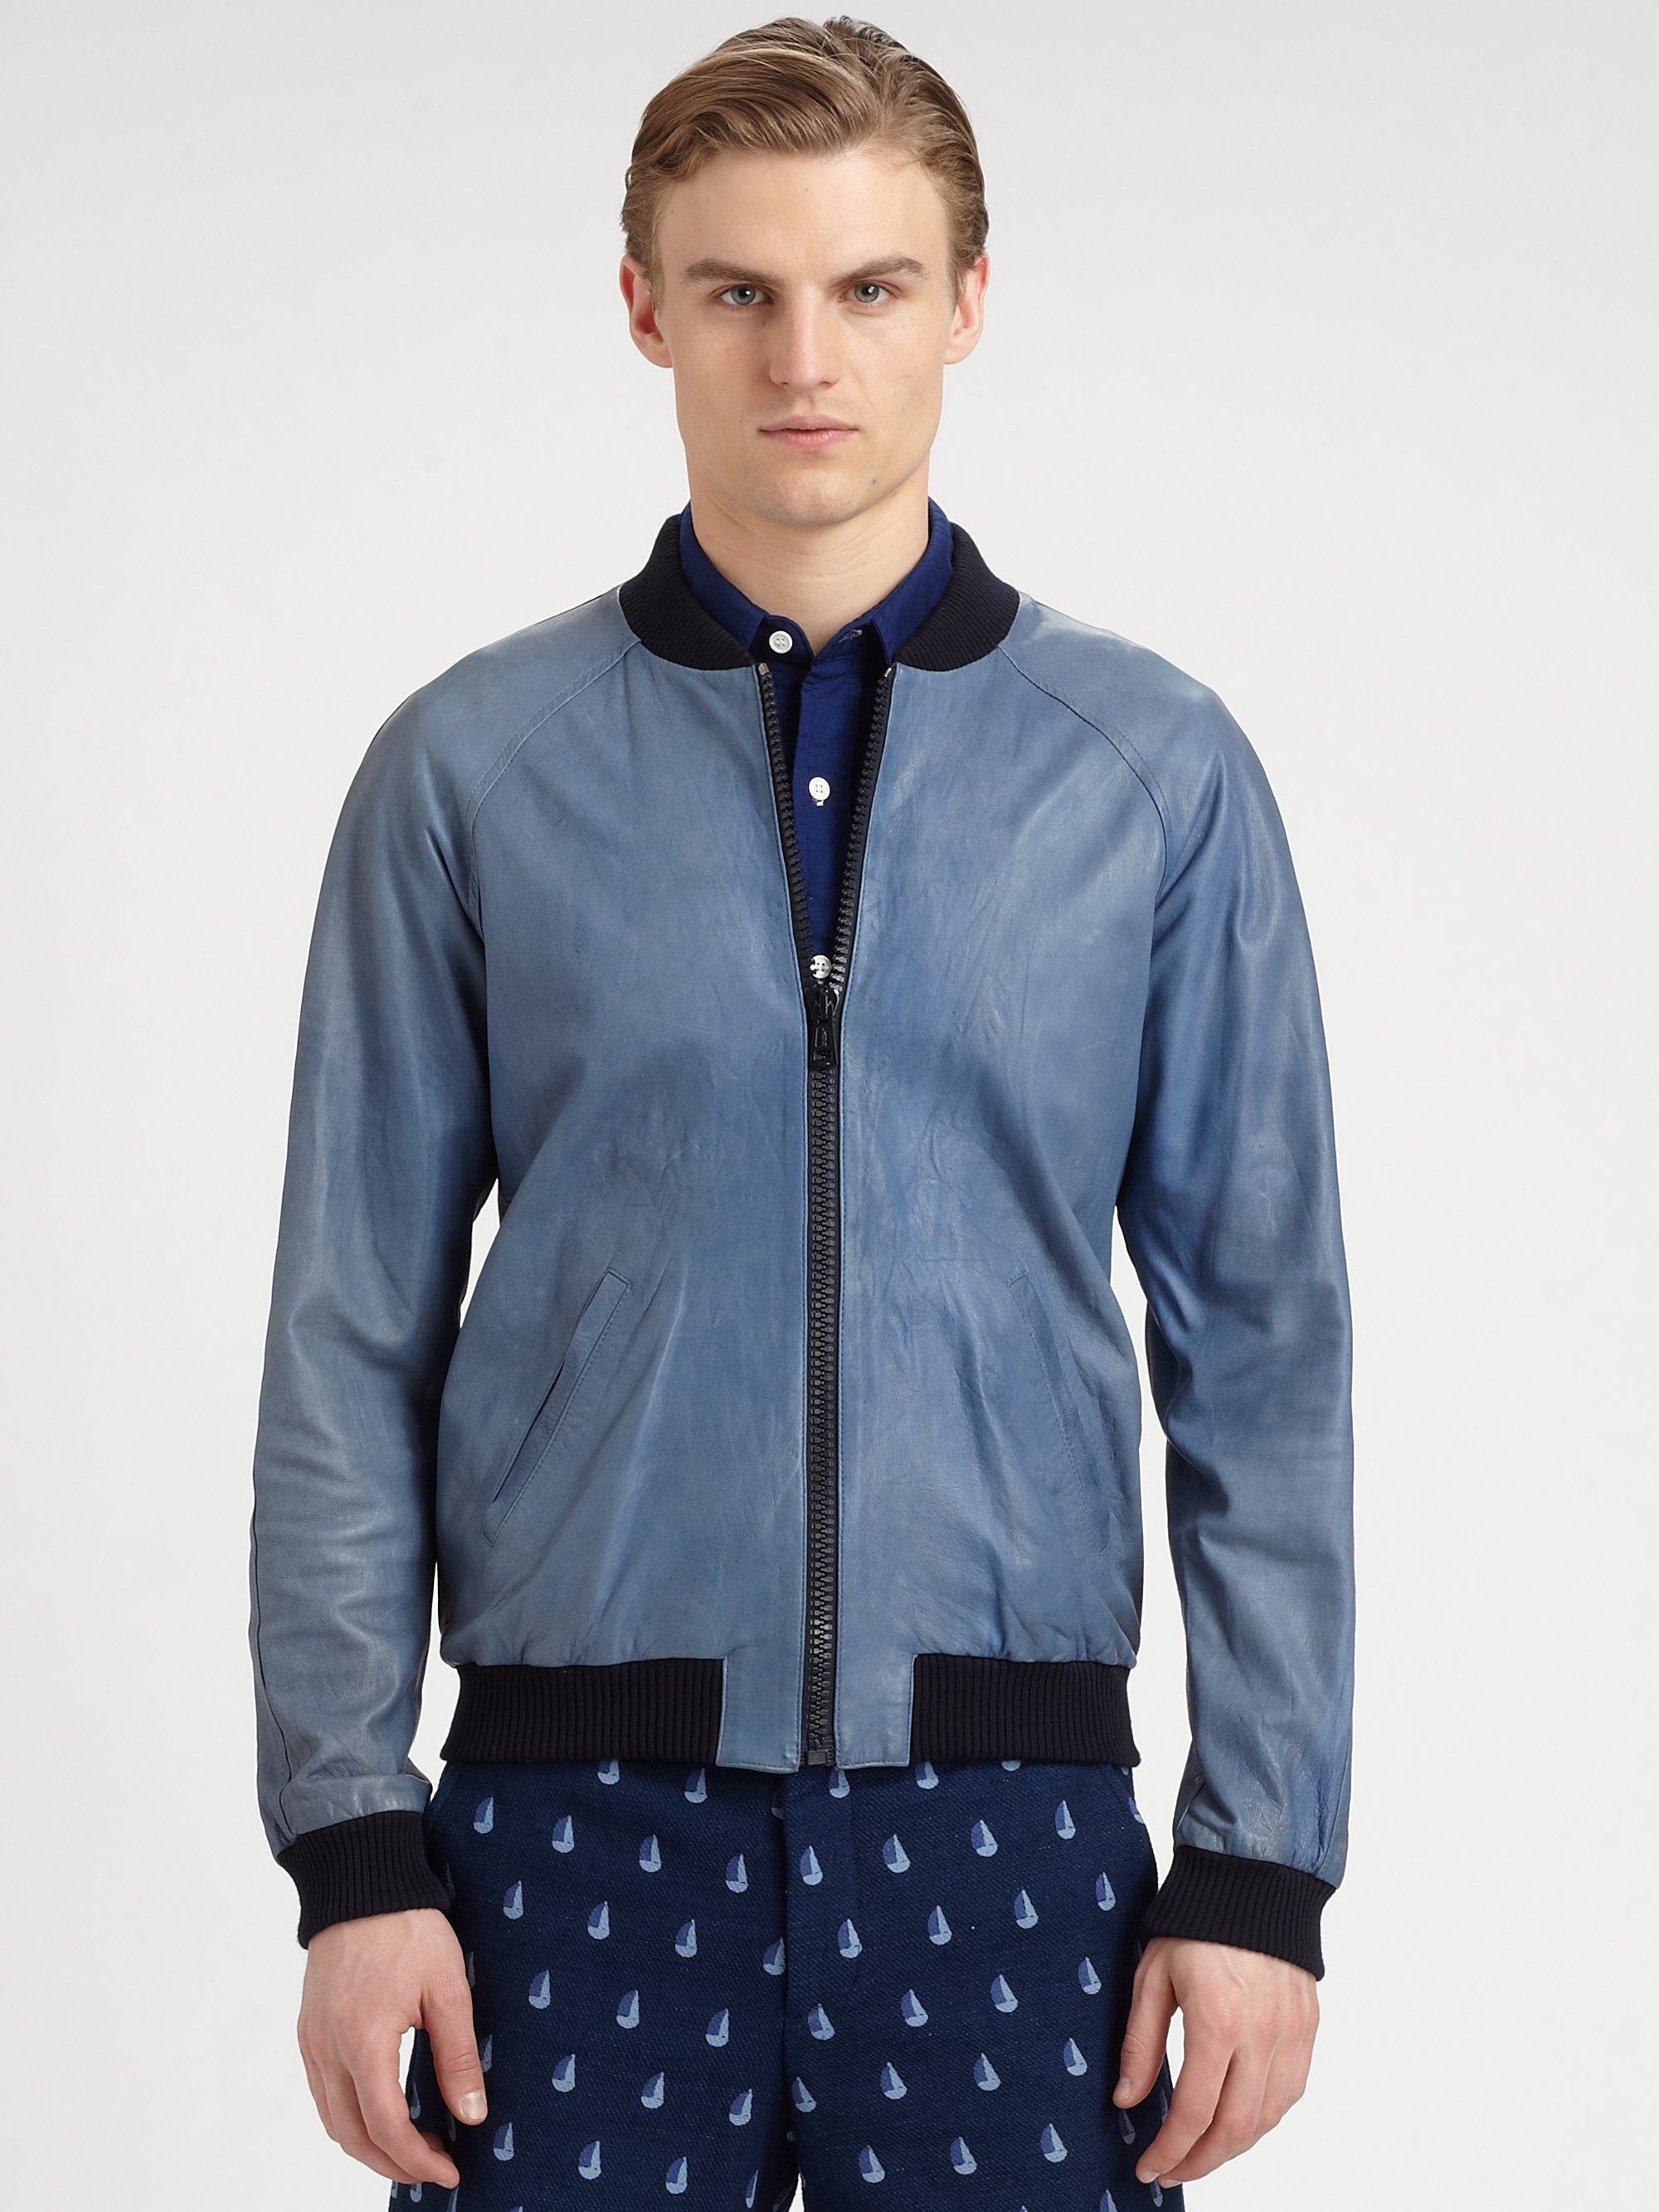 Band Of Outsiders Leather Bomber Jacket in Blue for Men (indigo blue ...